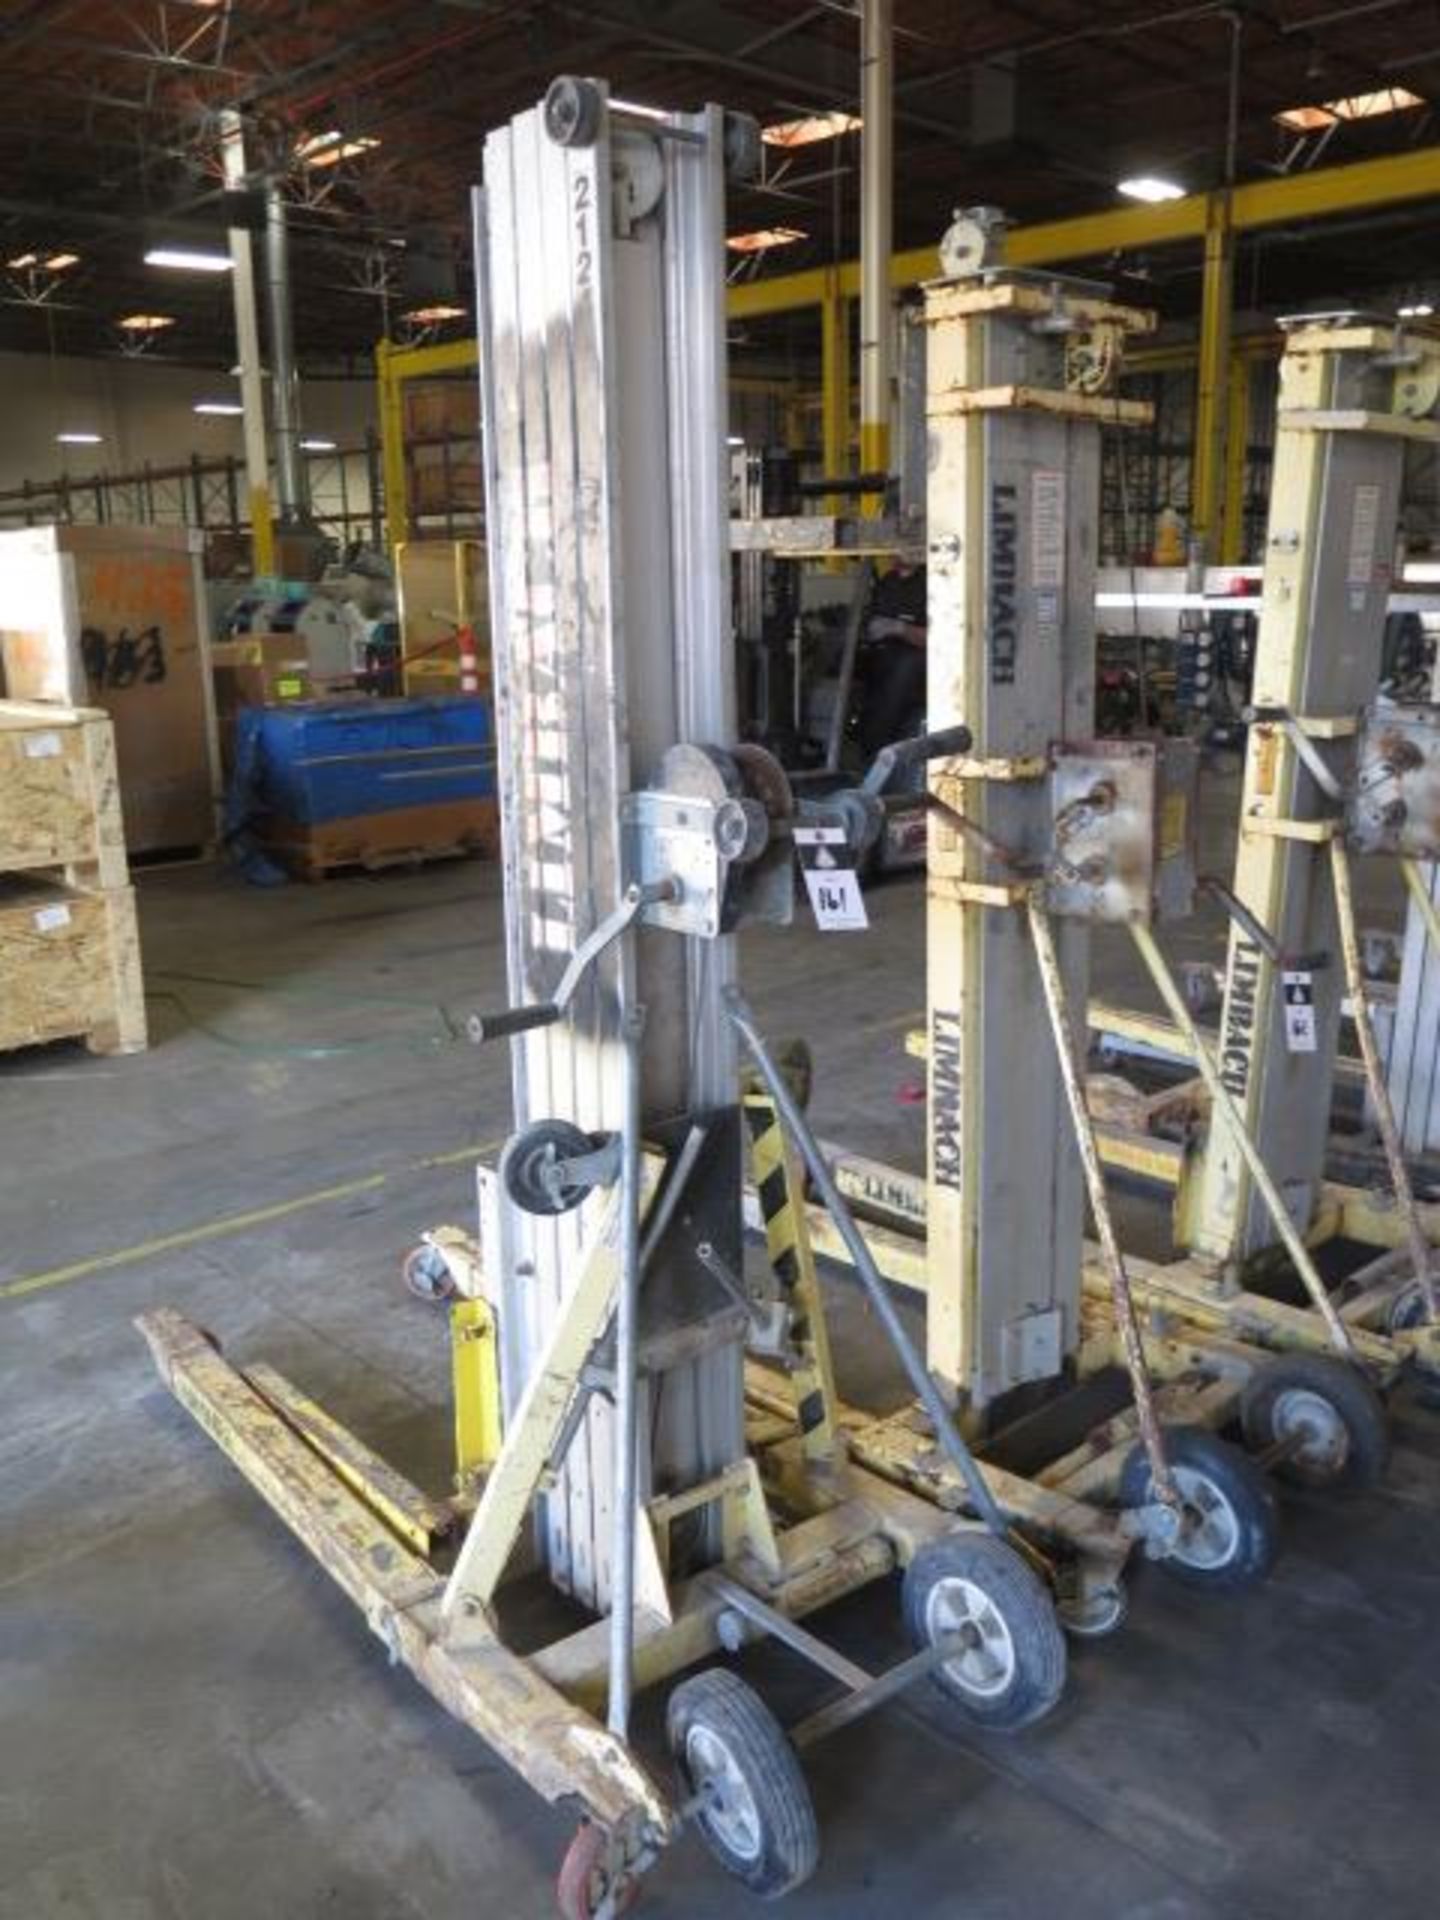 Genie "Super Lift" Material Lift (SOLD AS-IS - NO WARRANTY)